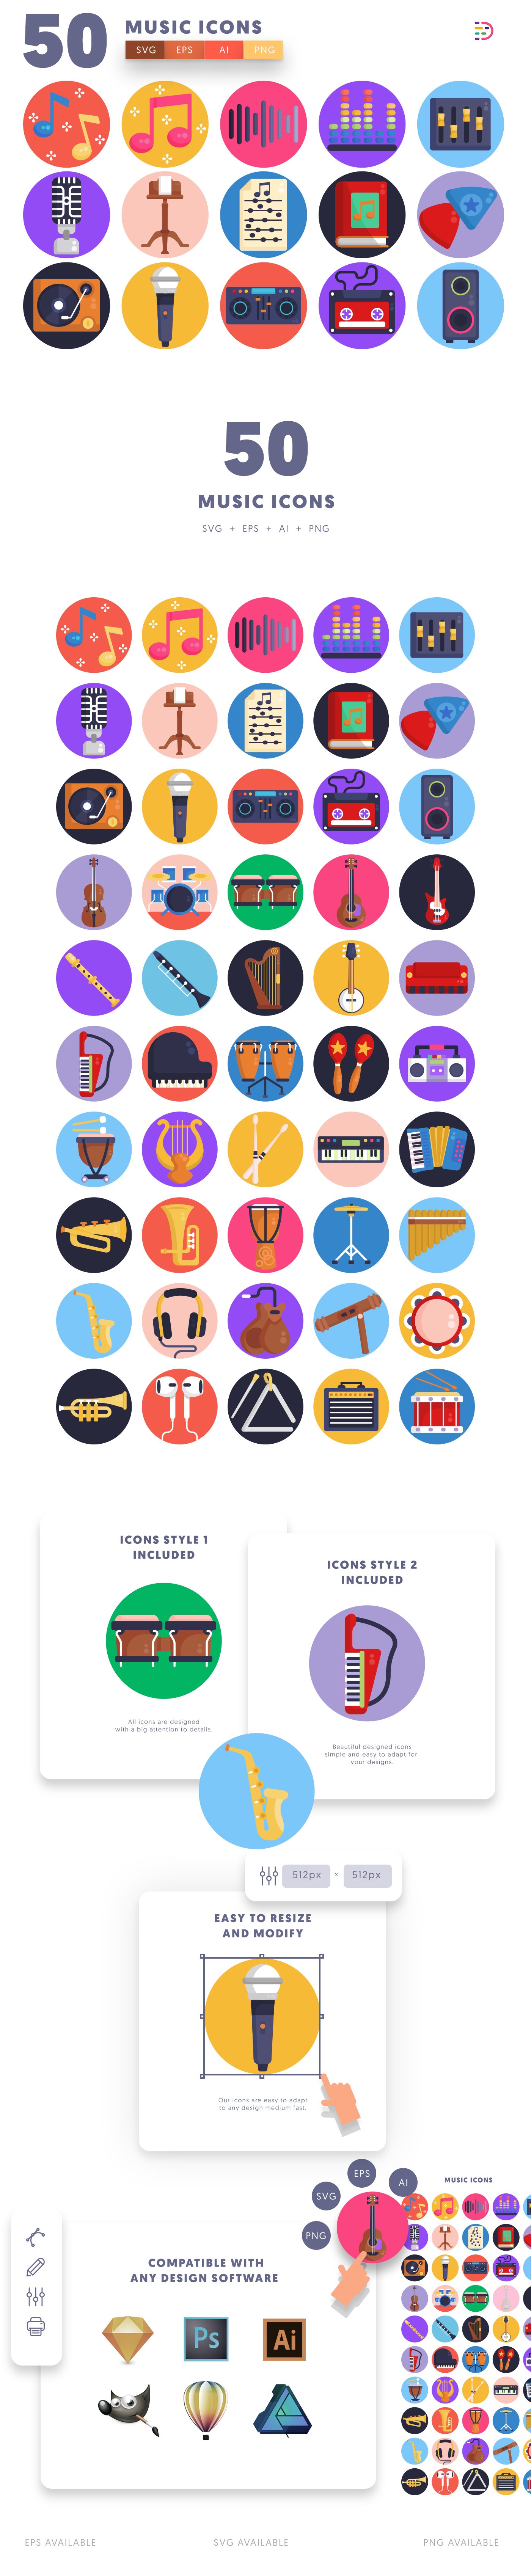 Editable music icons icon pack, easy to edit and customize icons